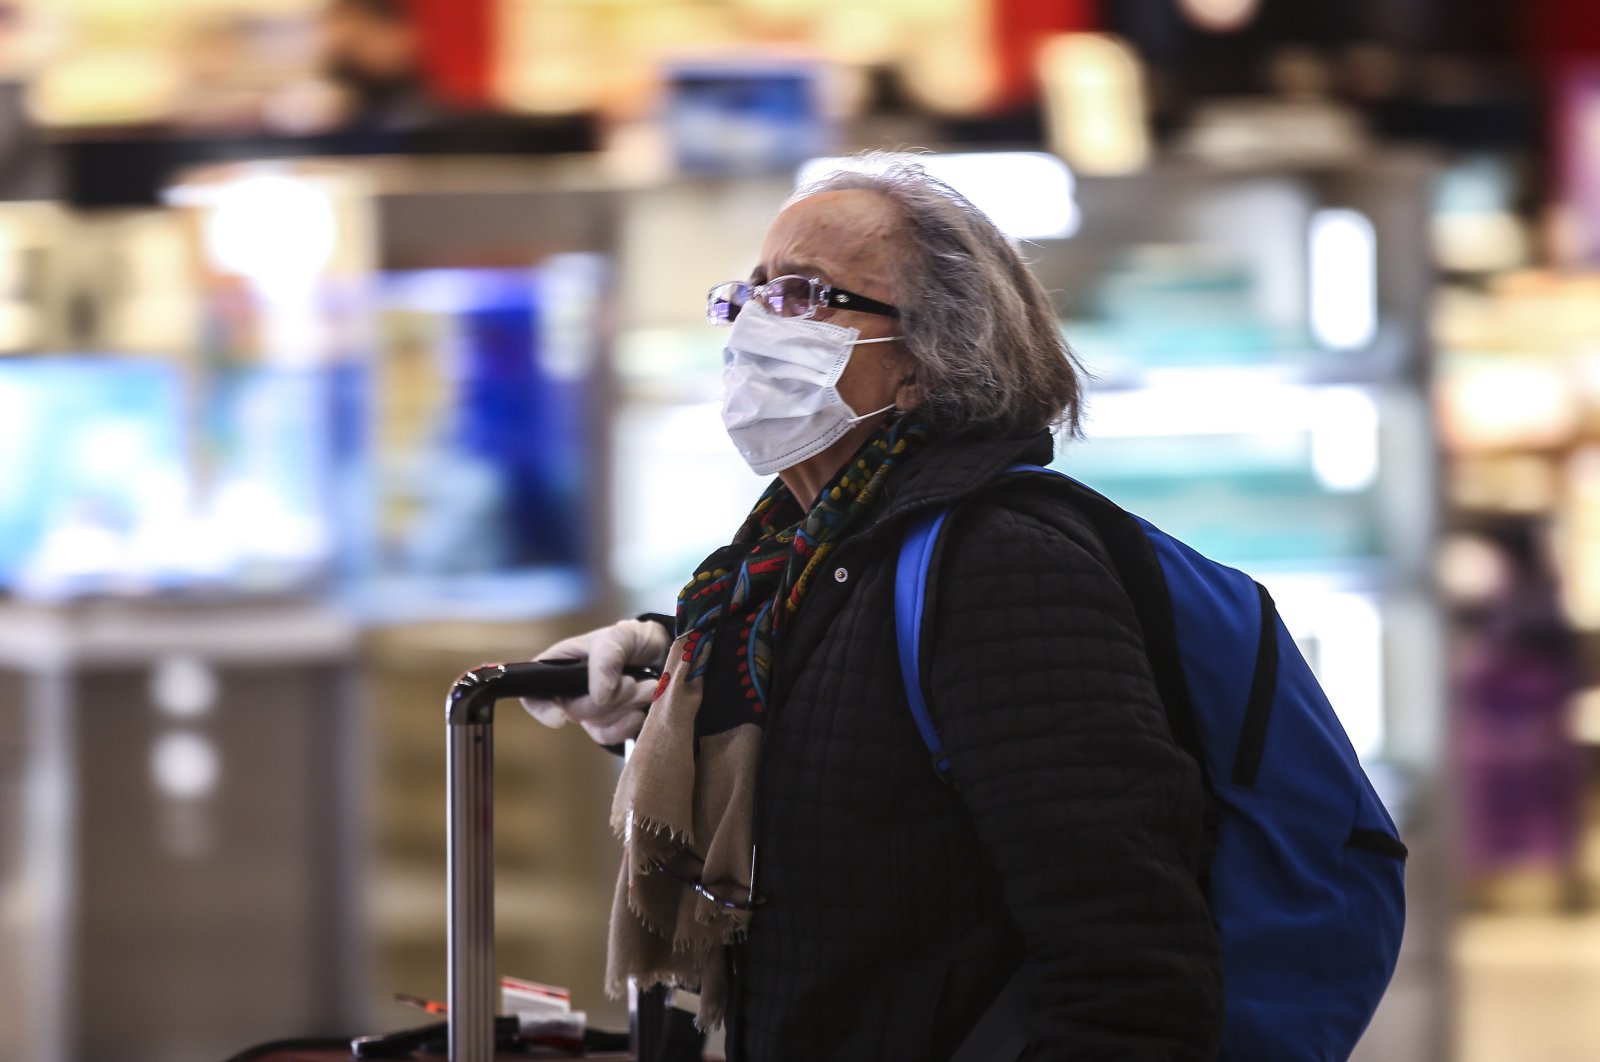 A Turkish citizen wearing a surgical mask arrives at Istanbul Airport after traveling from the U.K. as part of an evacuation effort, Istanbul, Tuesday, March 17, 2020. (AA Photo)